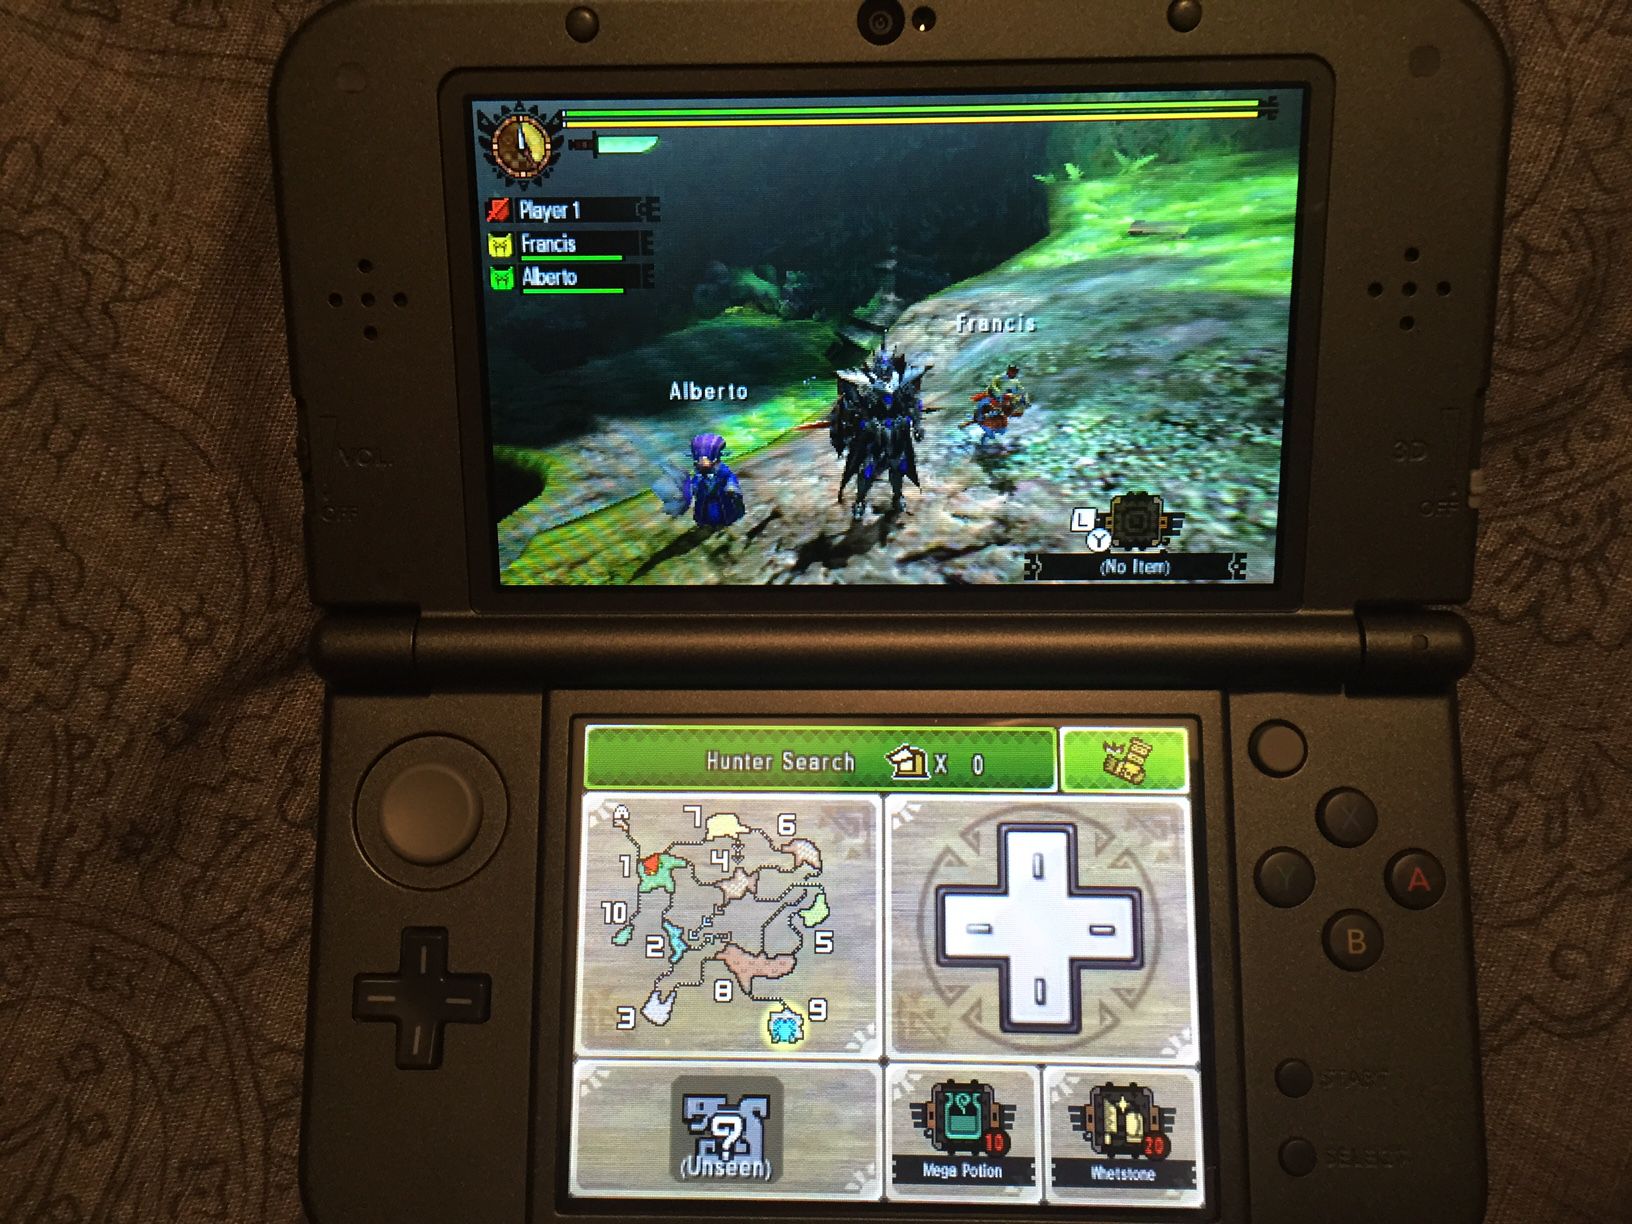 Review: Nintendo's New 3DS is far better than the original model, but do you need to